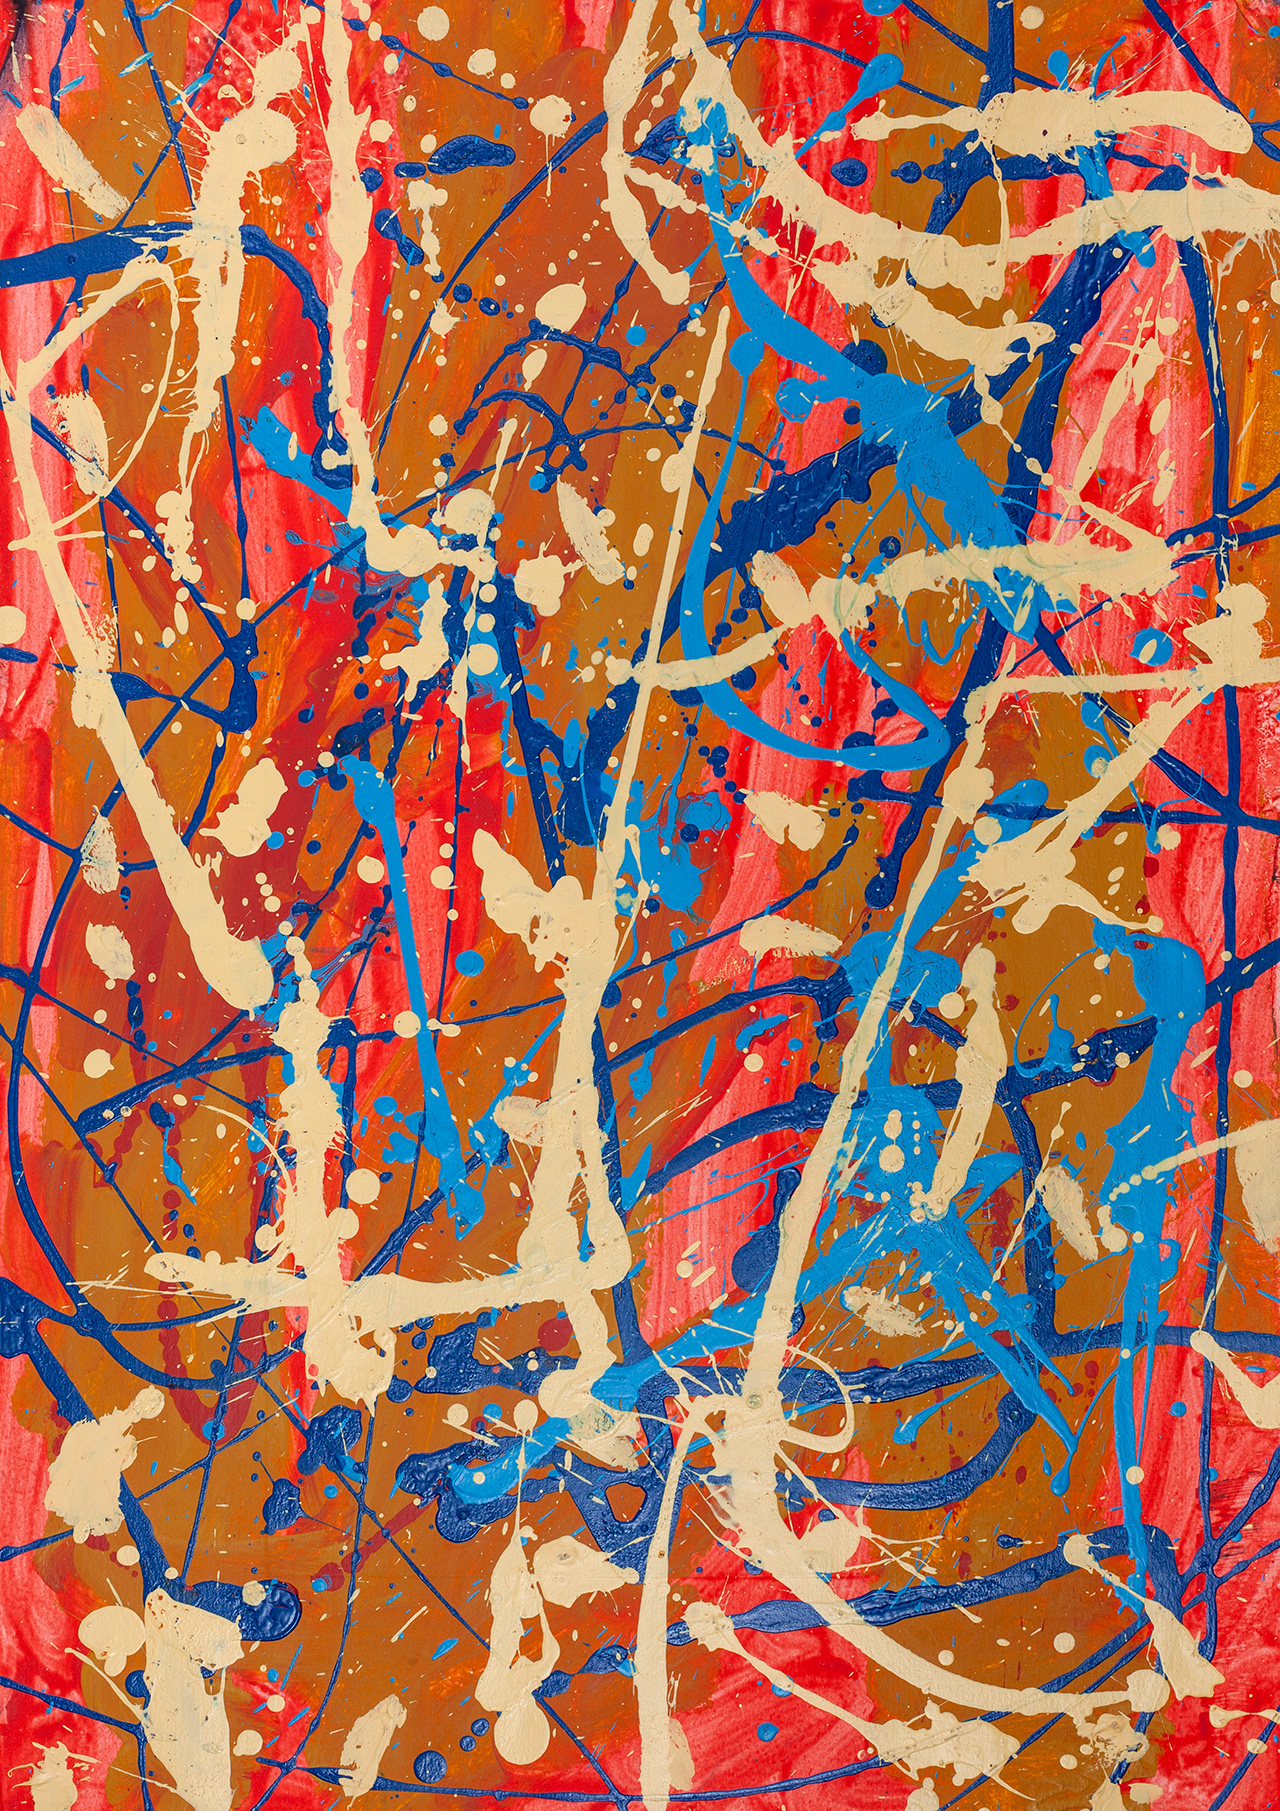 Edward Dwurnik - Abstract composition (Mixed media on paper | Size: 57 x 76 cm | Price: 26000 PLN)